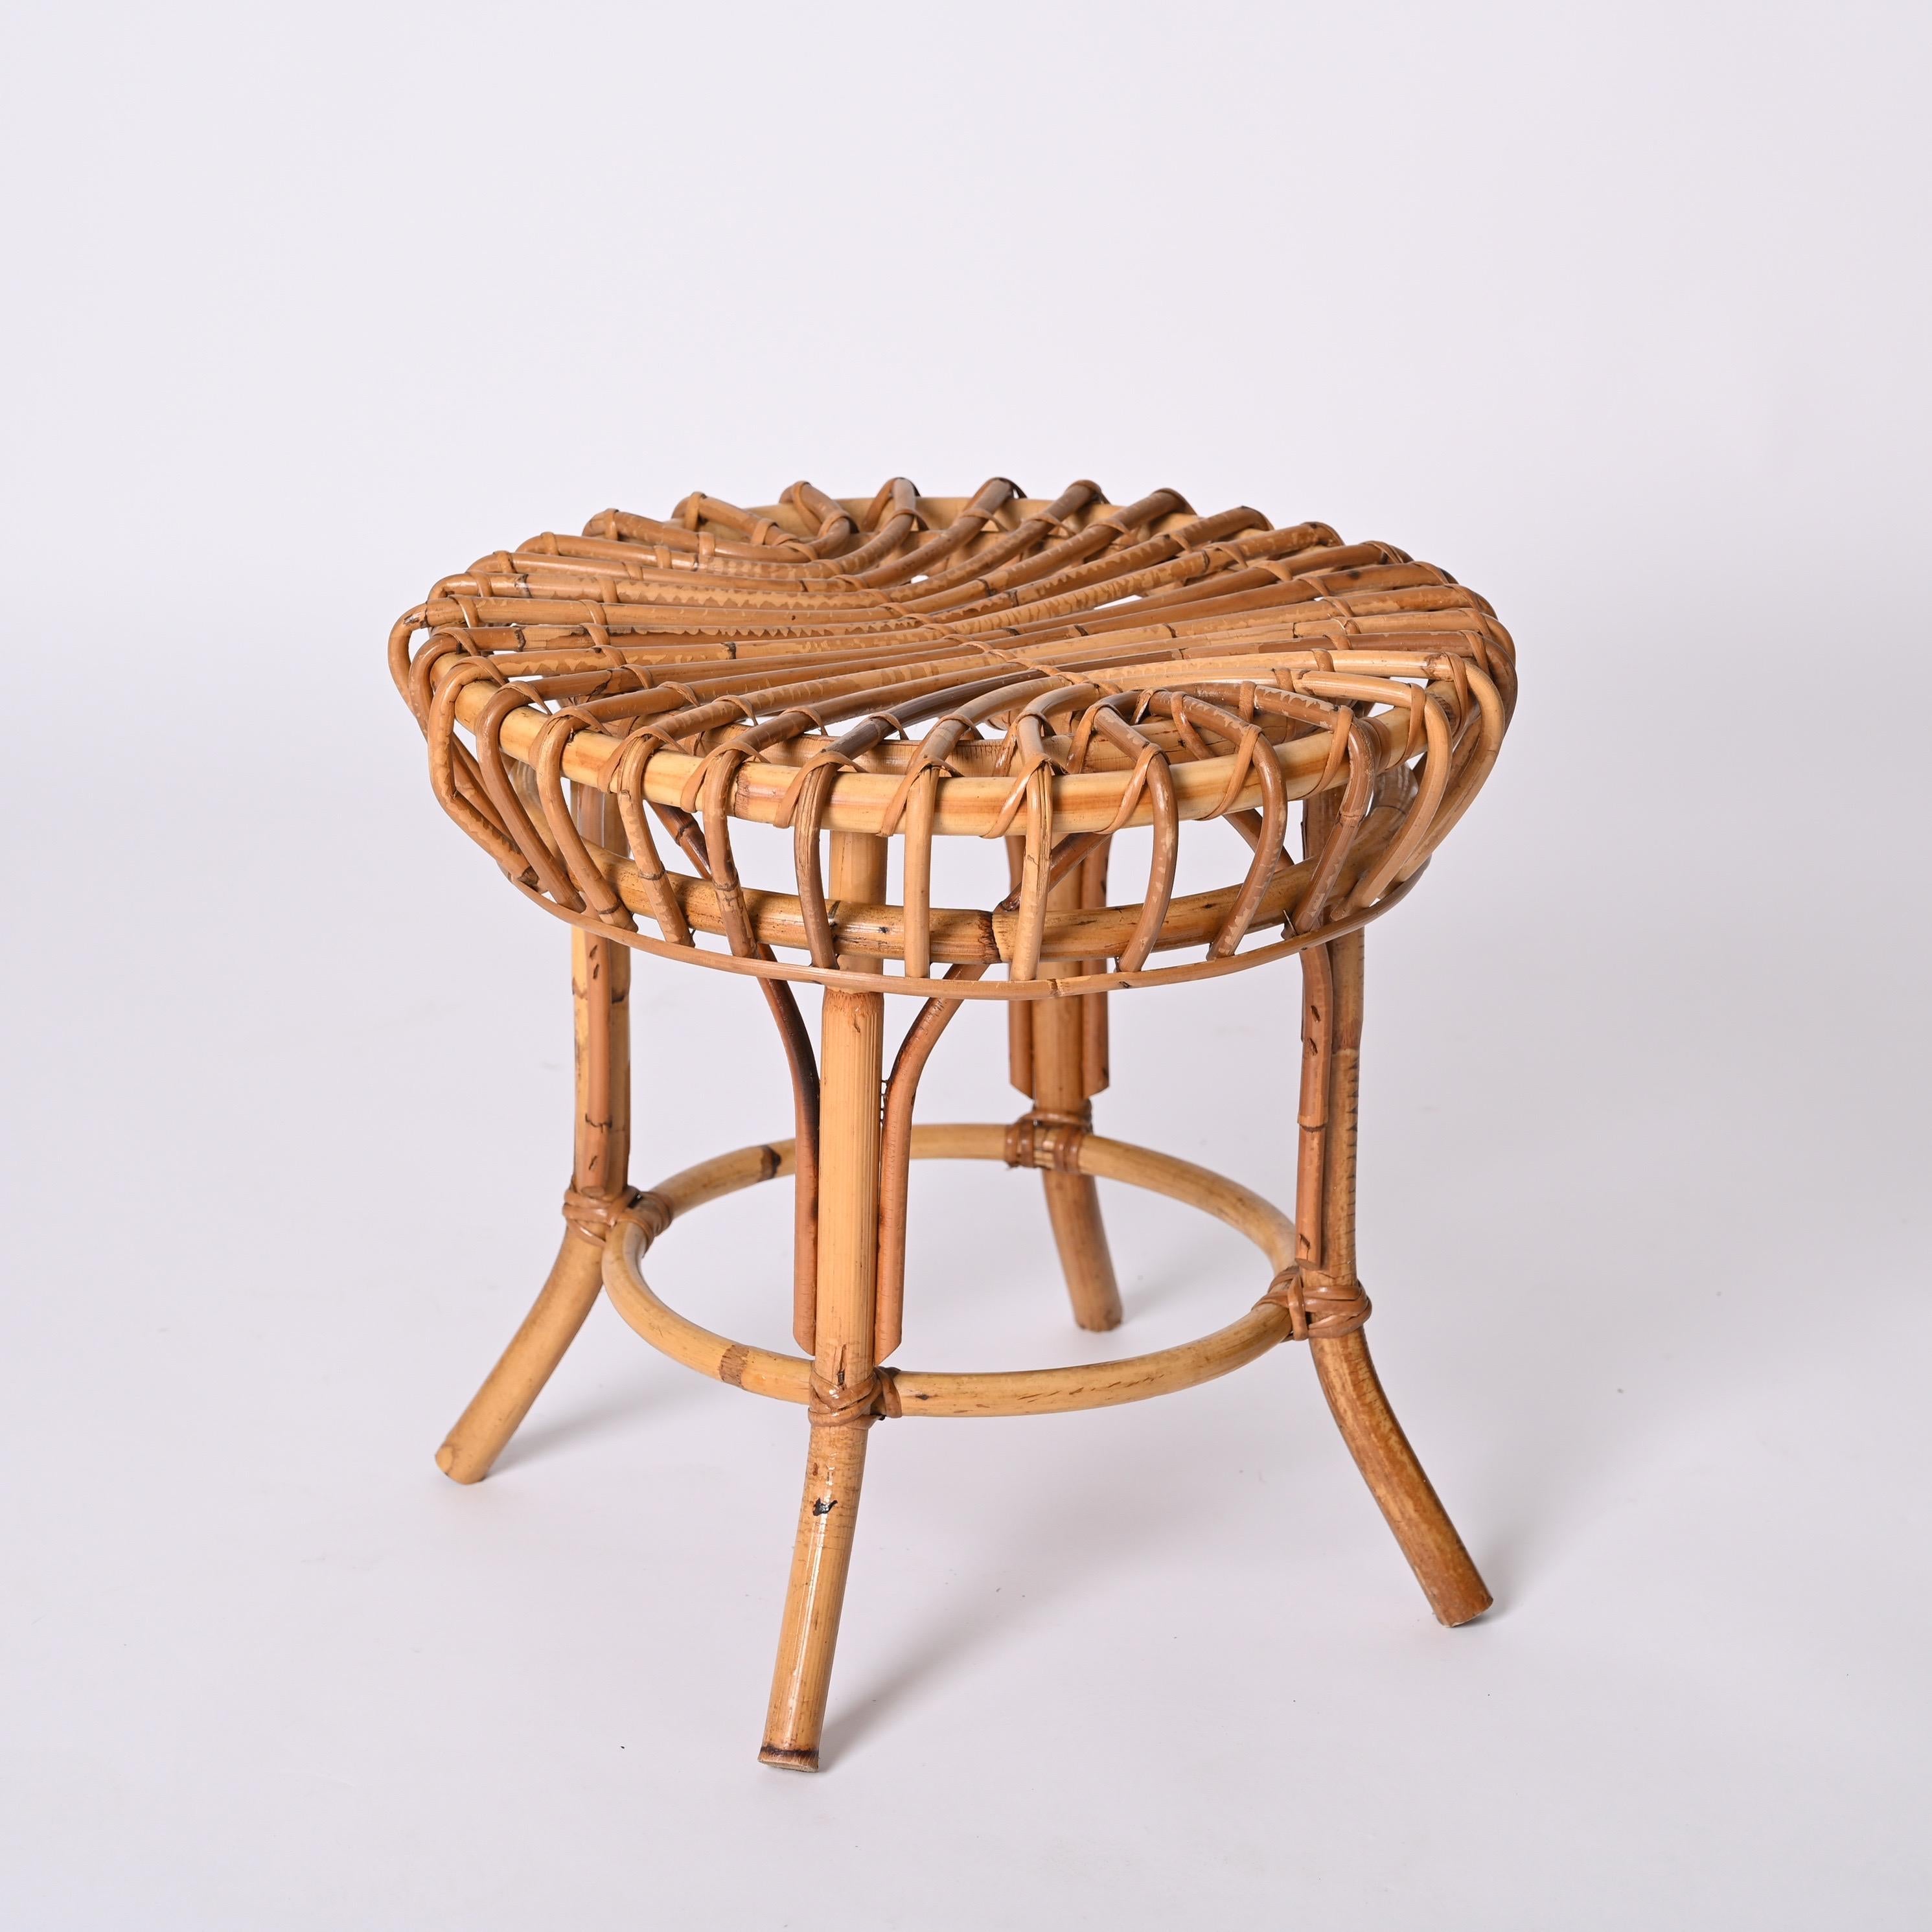 Franco Albini Midcentury Rattan and Bamboo Round Ottoman Stool, Italy 1960s For Sale 1